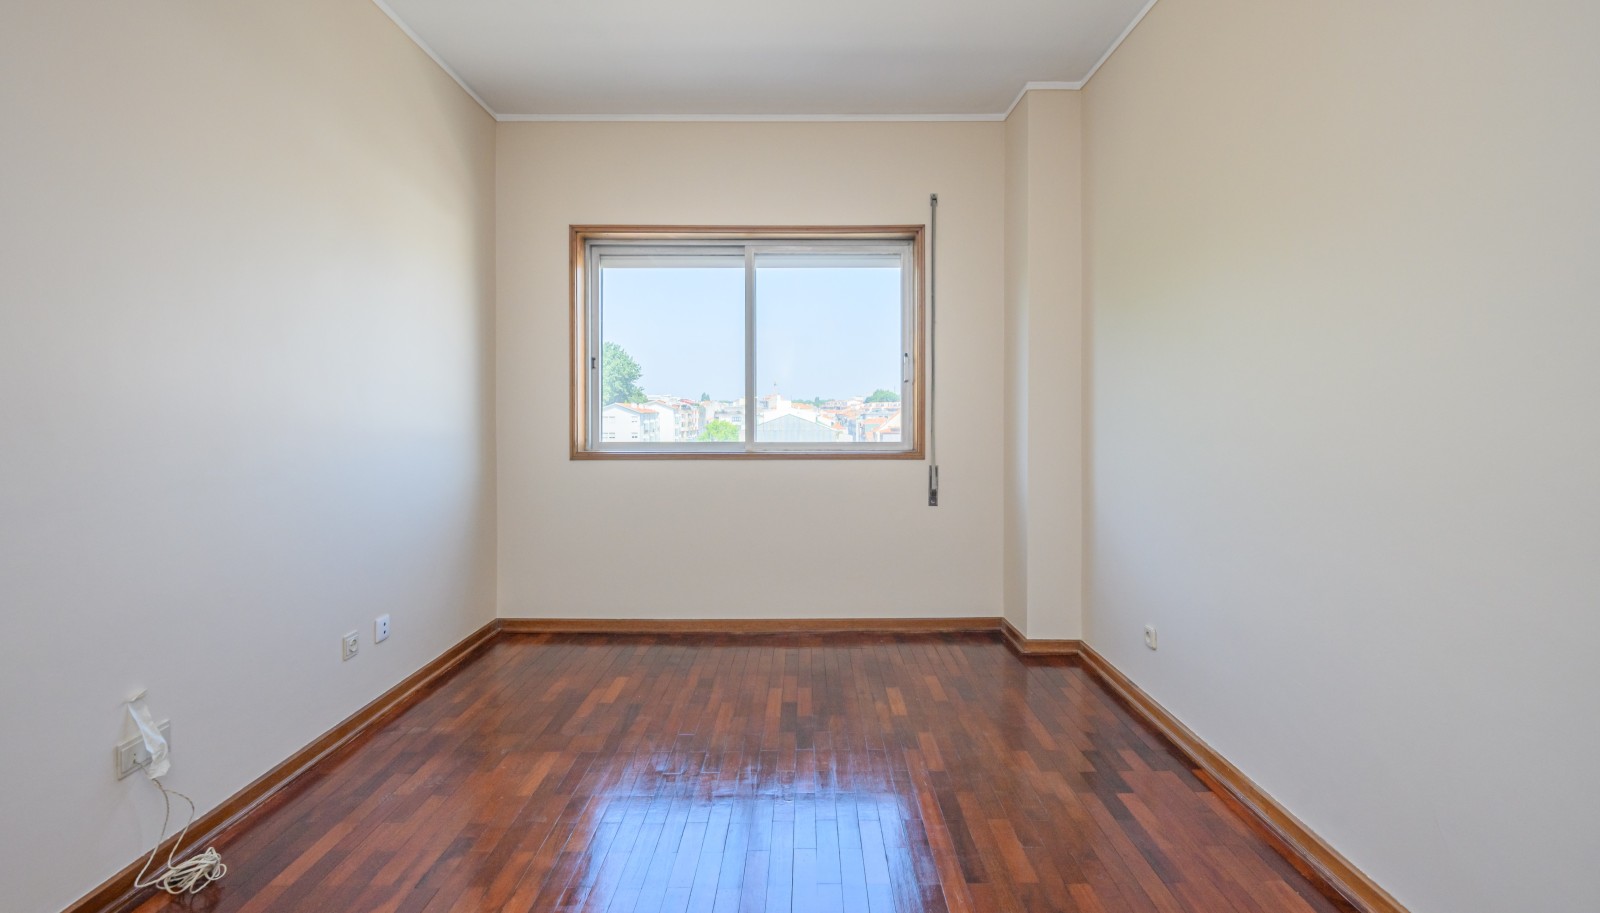 4 bedroom apartment with balcony, for sale, in Porto, Portugal_228361